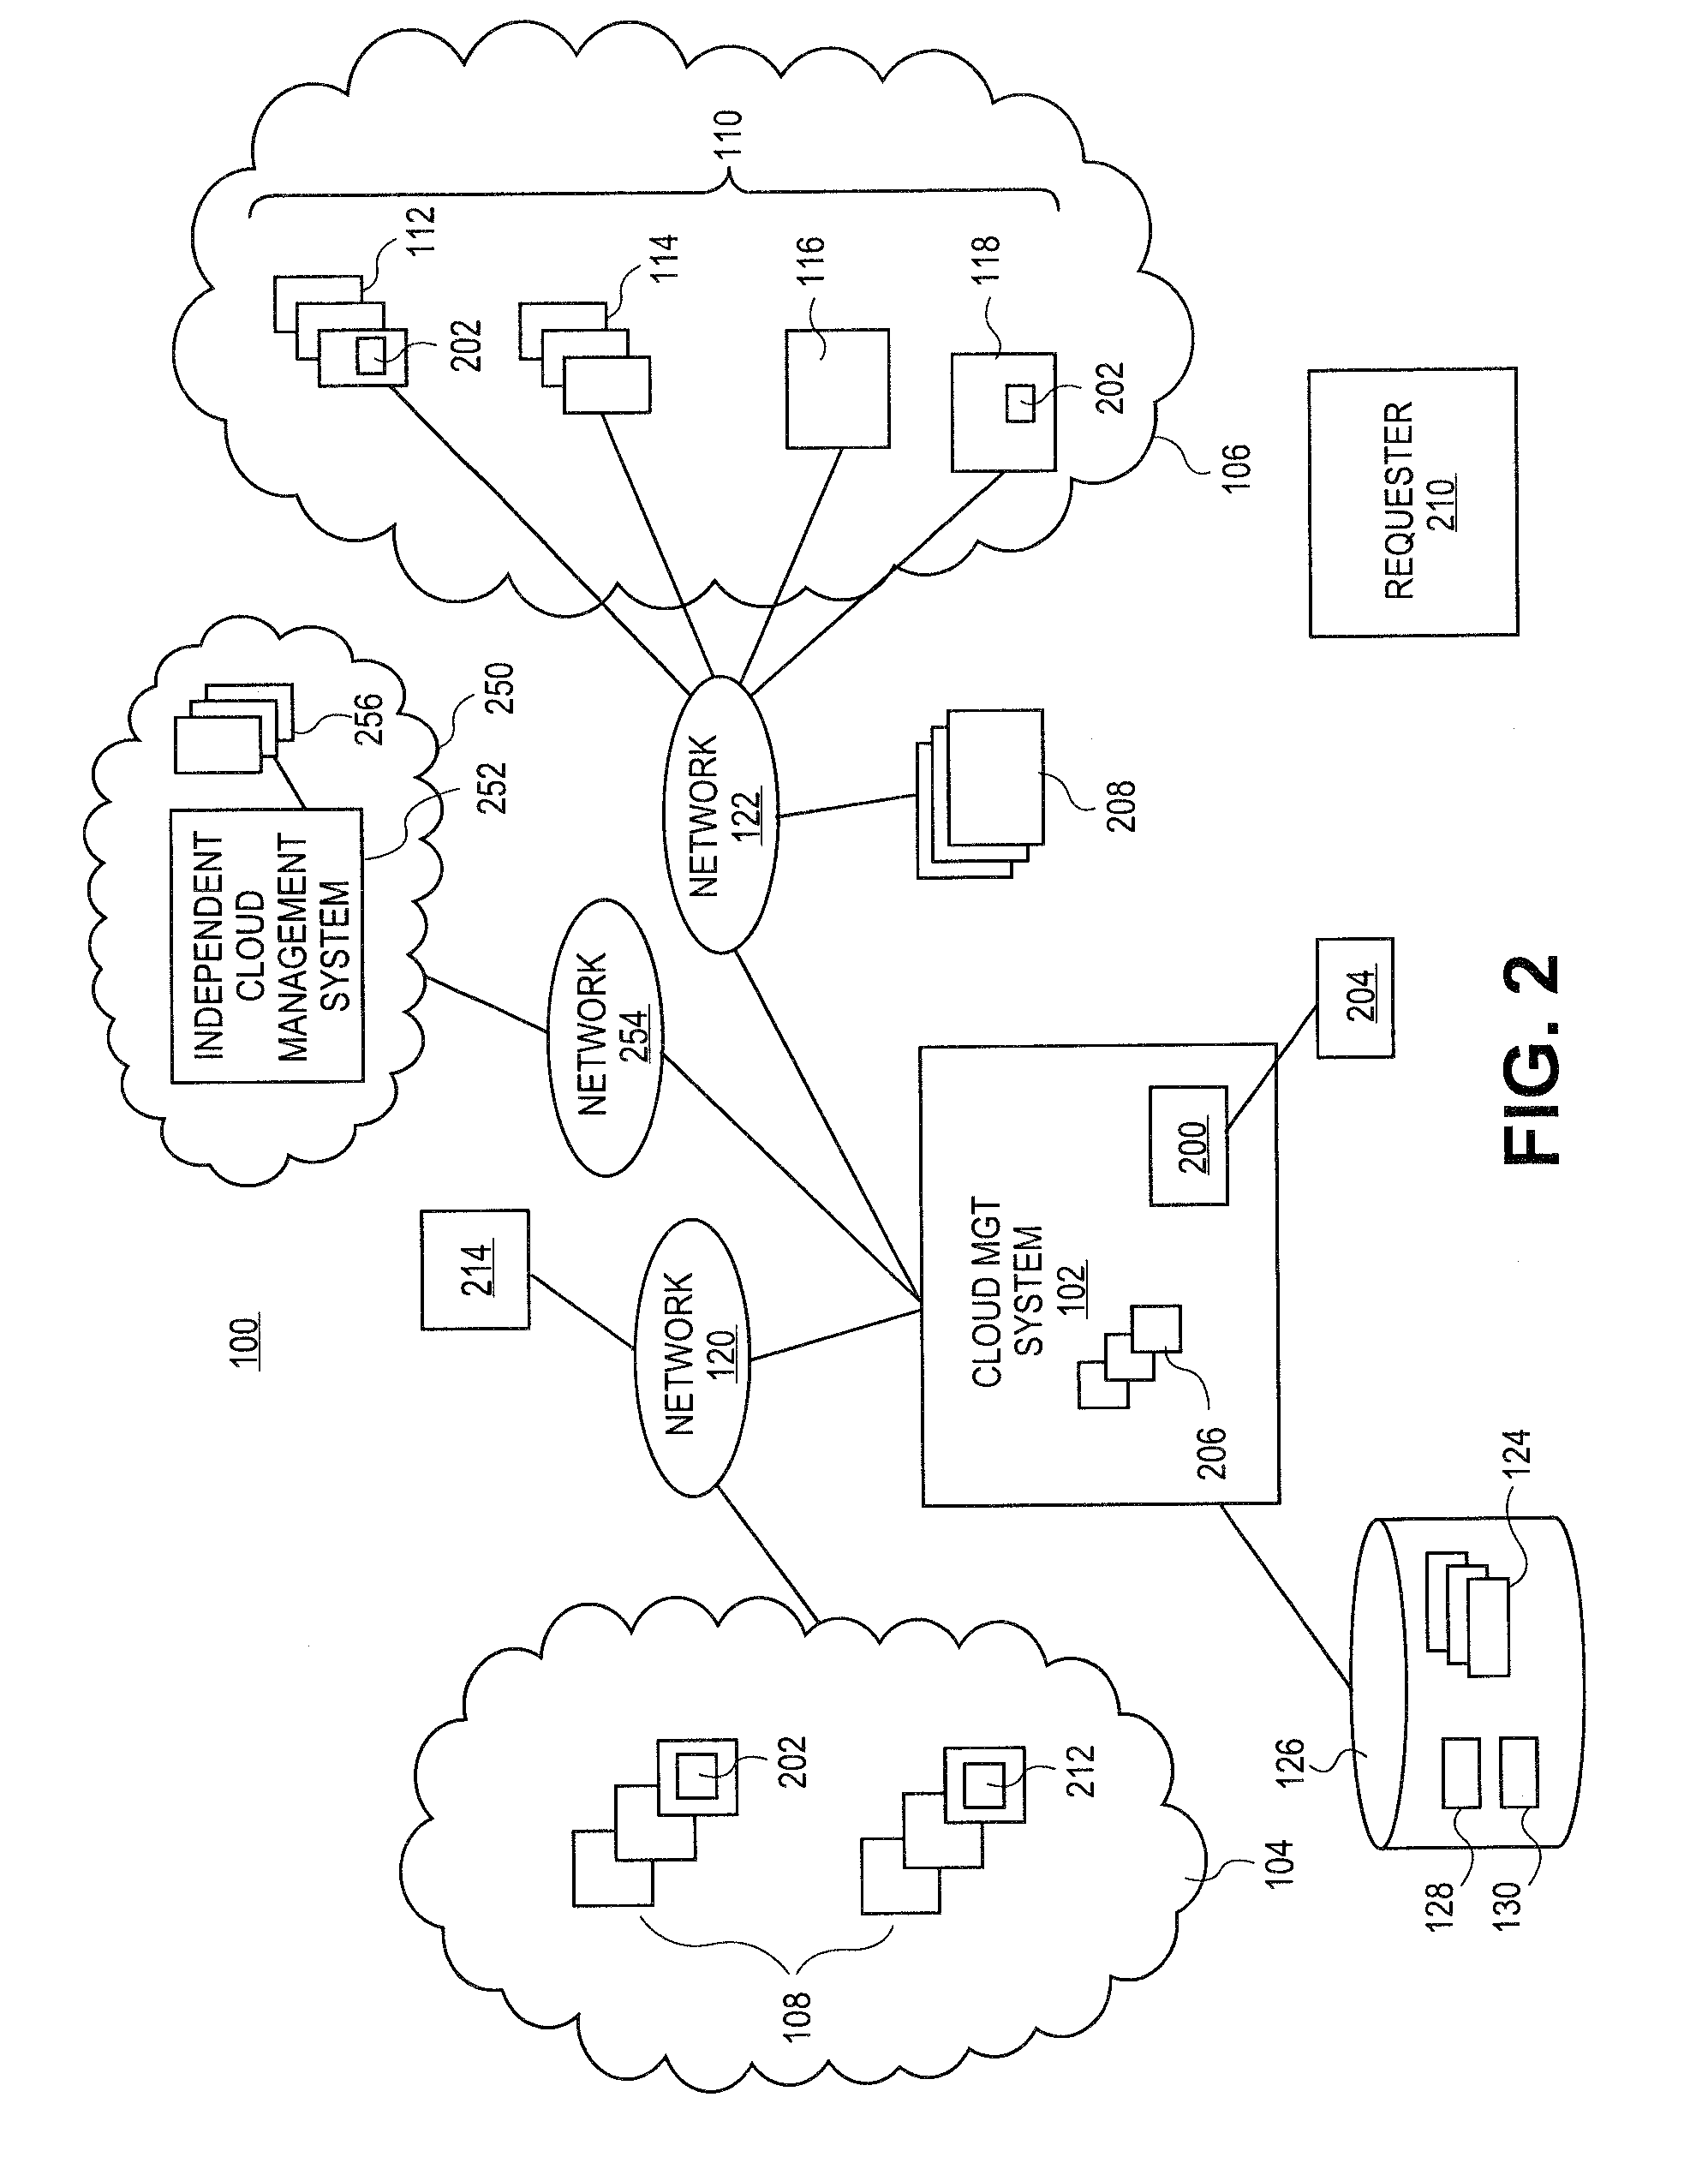 Methods and systems for automated migration of cloud processes to external clouds